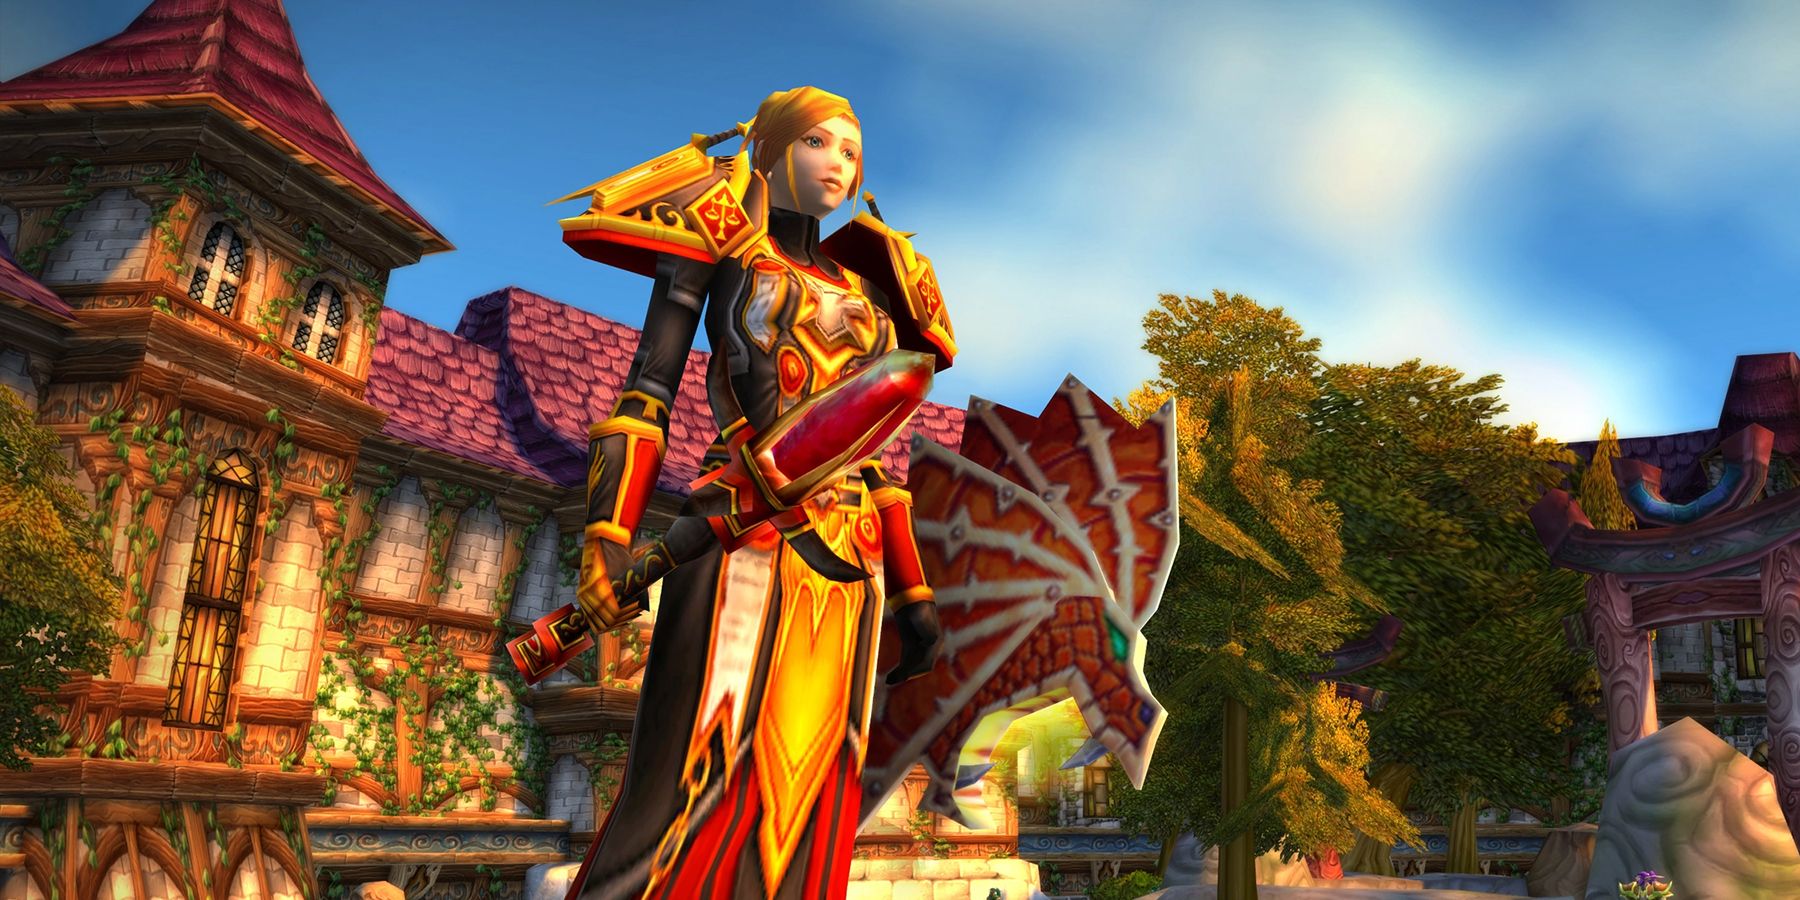 world of warcraft expanding classic tier sets in season of discovery